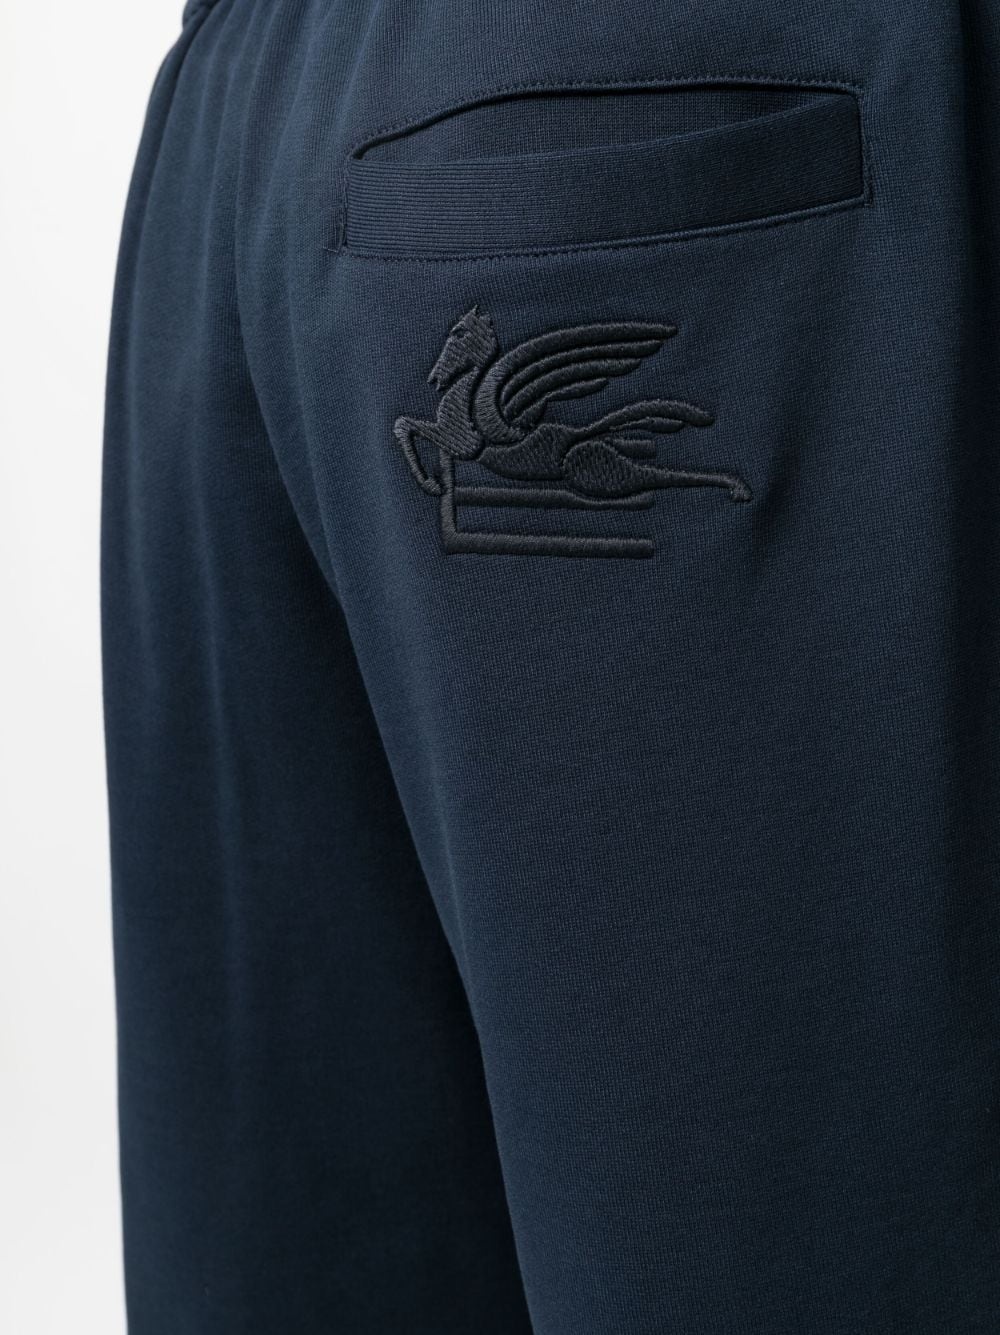 Pegaso-embroidered jersey track pants - 5